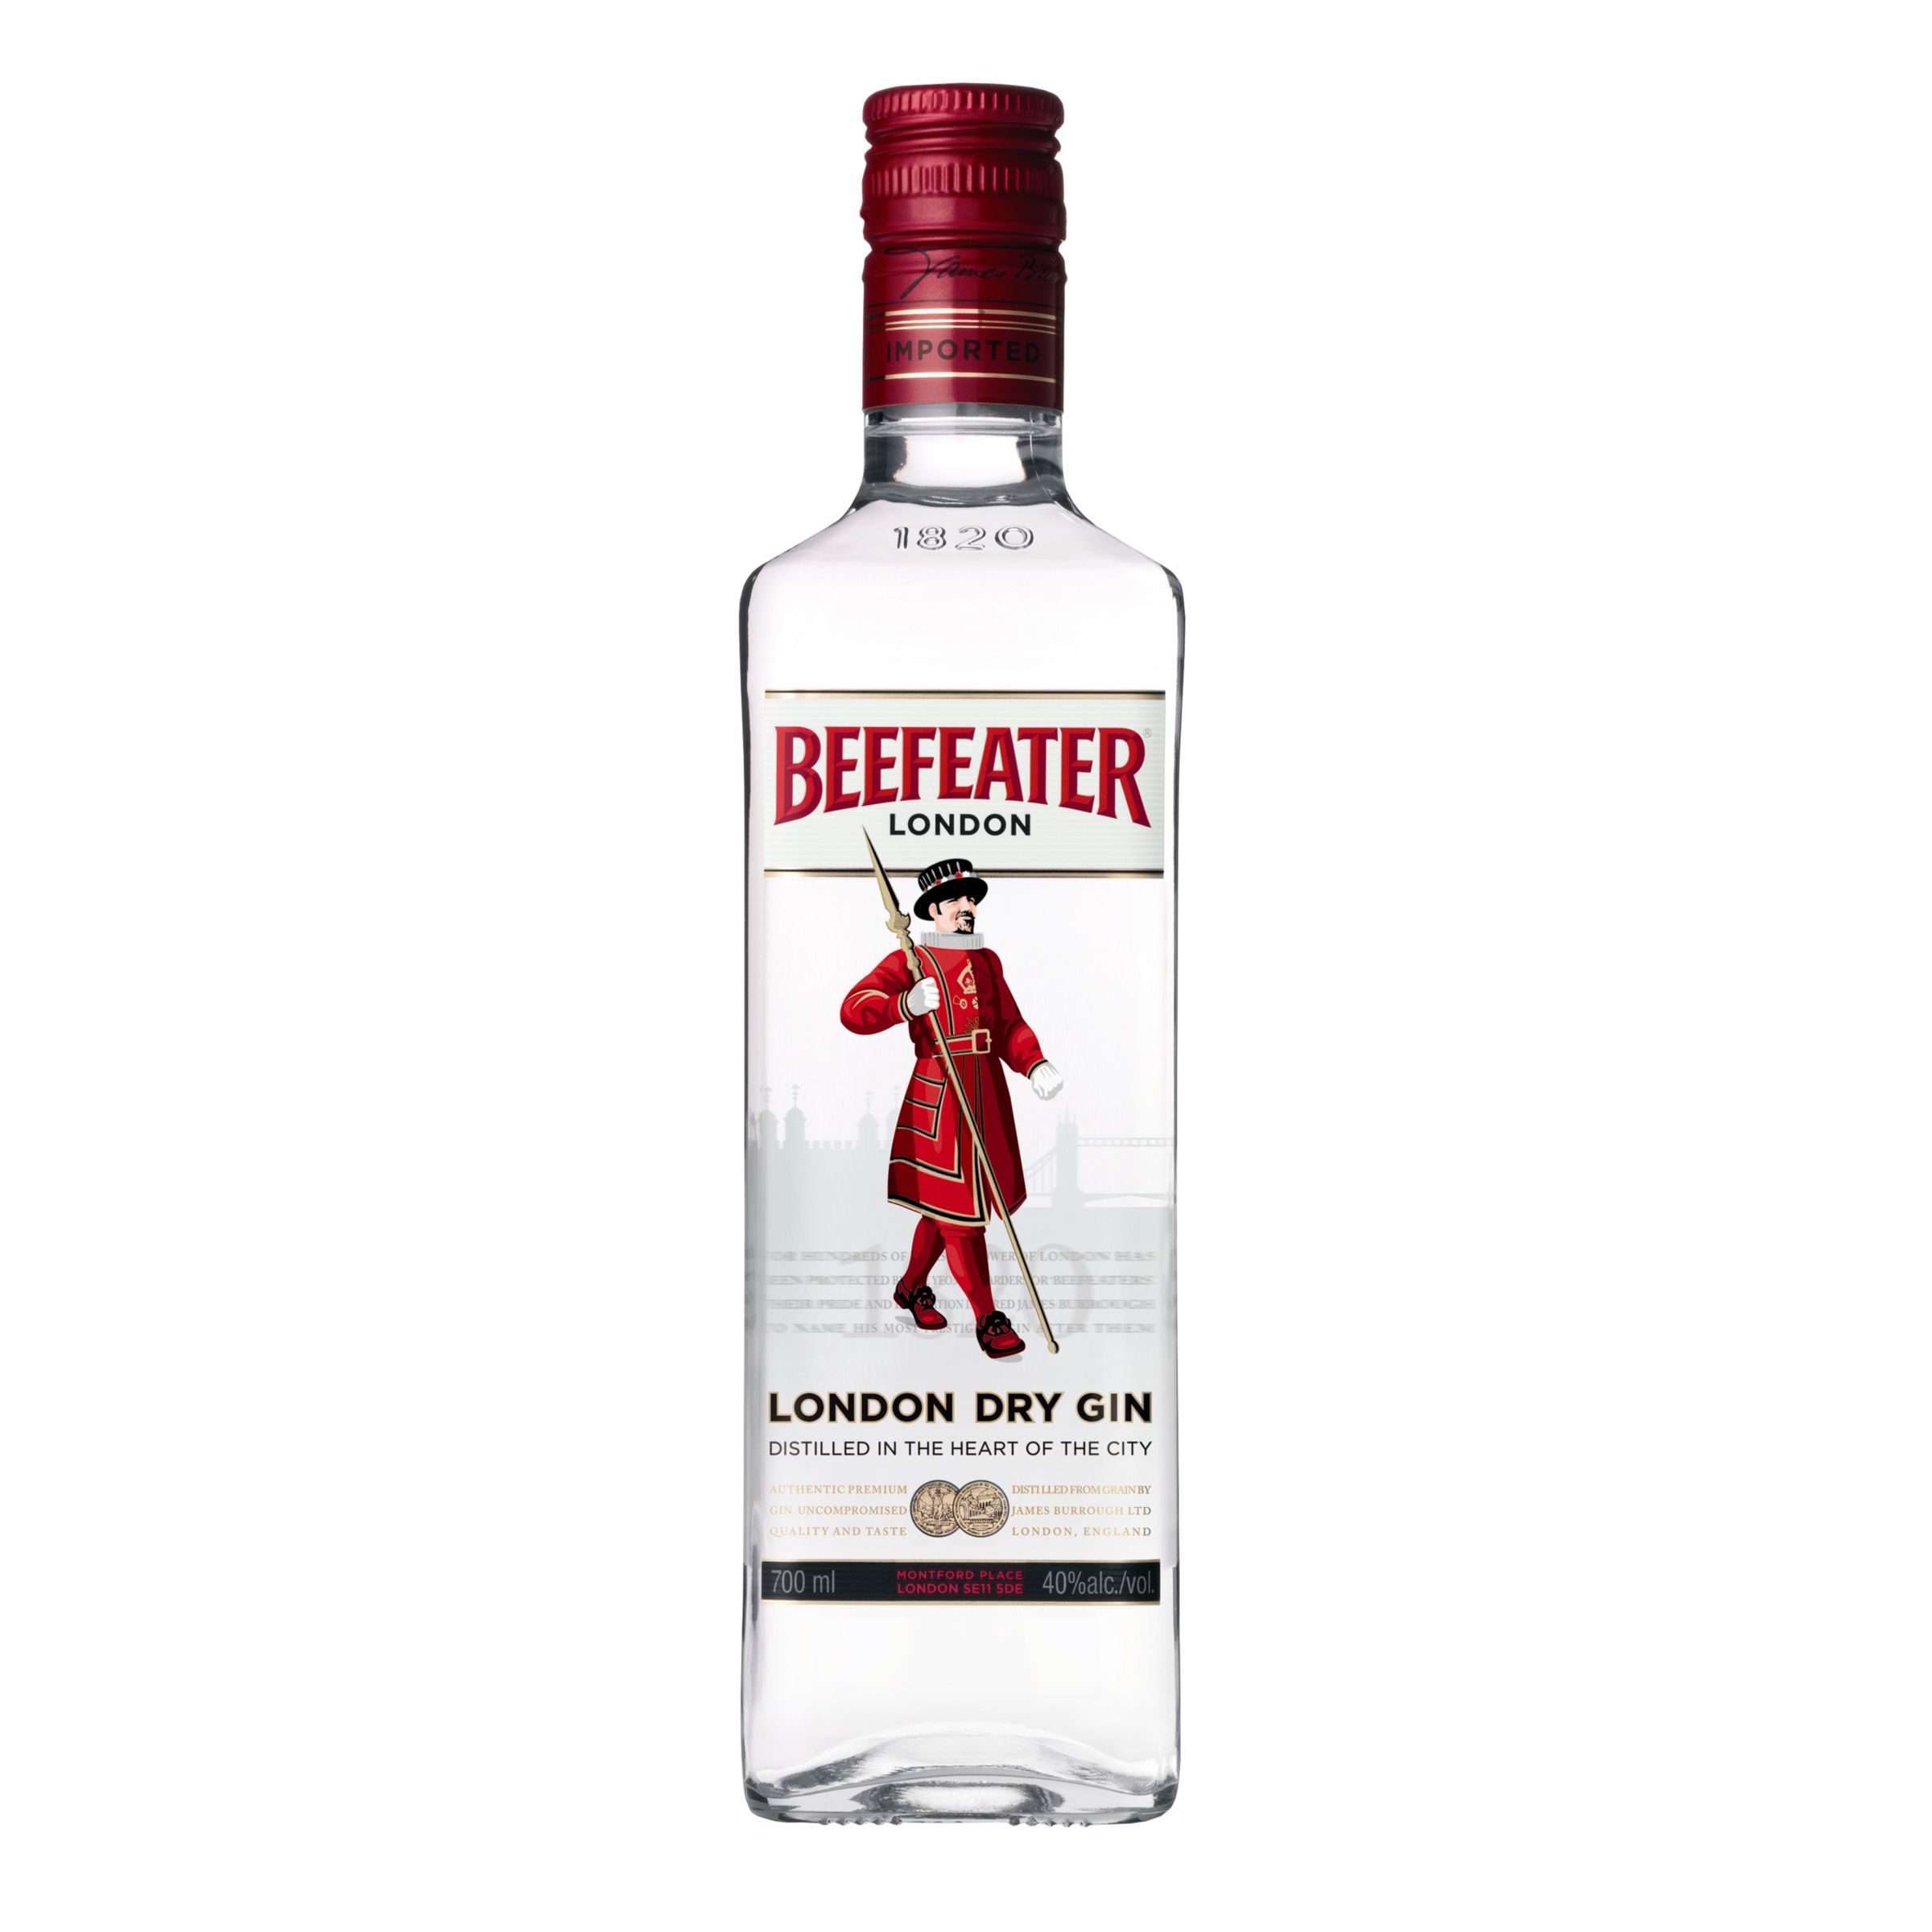 Beefeater London Dry Gin at John Lewis